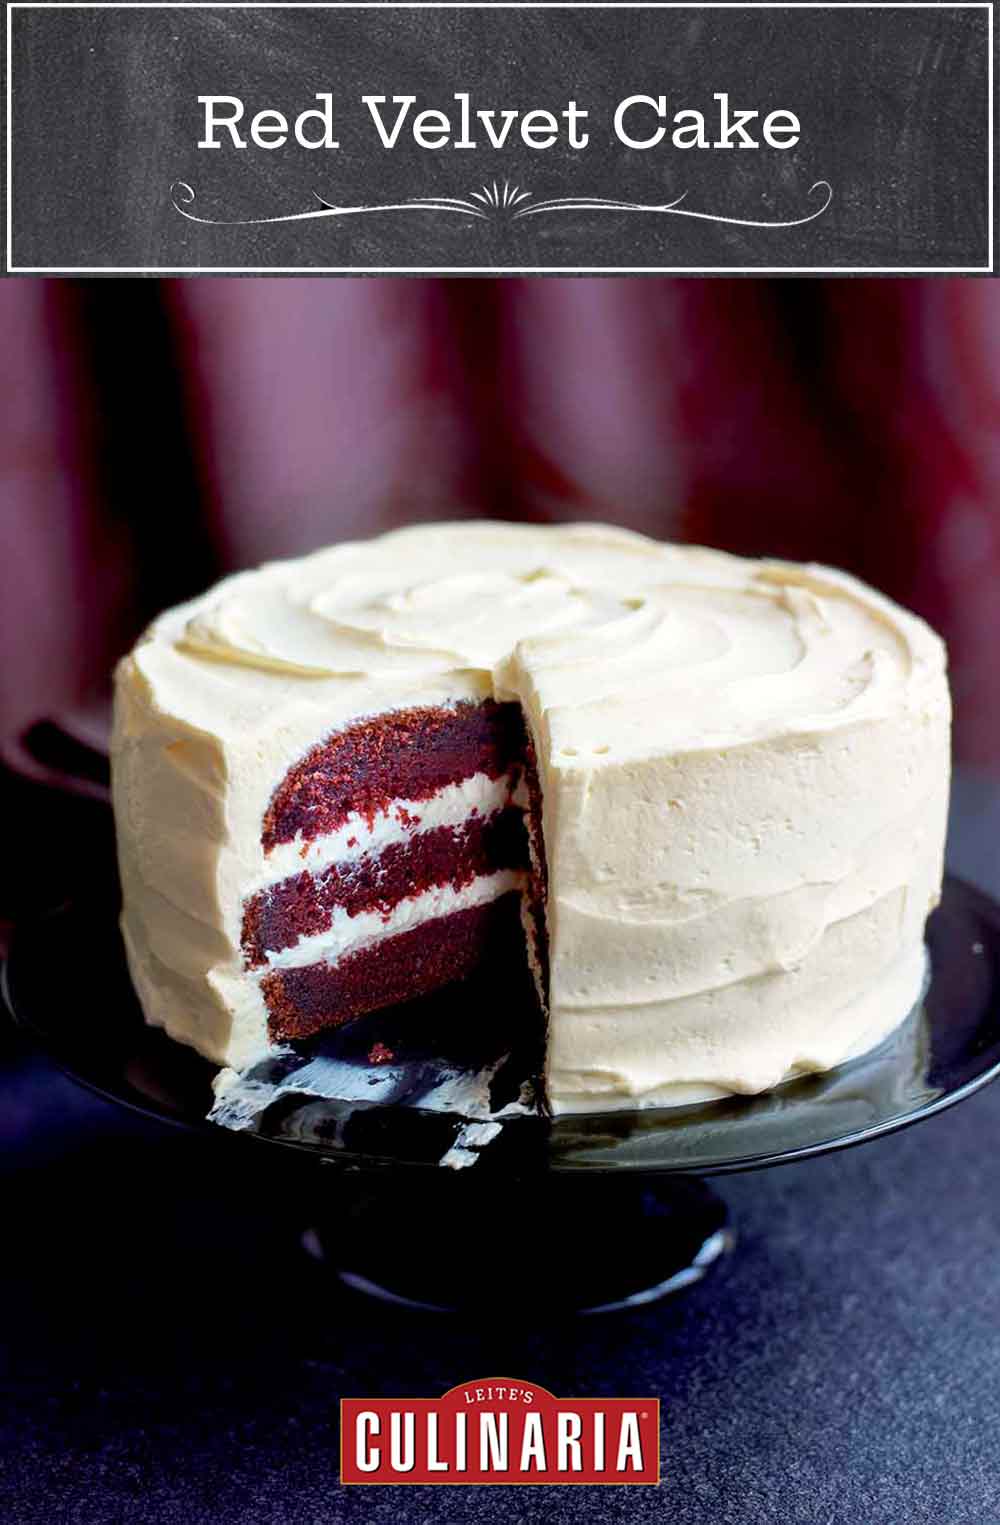 A red velvet cake with cream cheese frosting on a cake stand